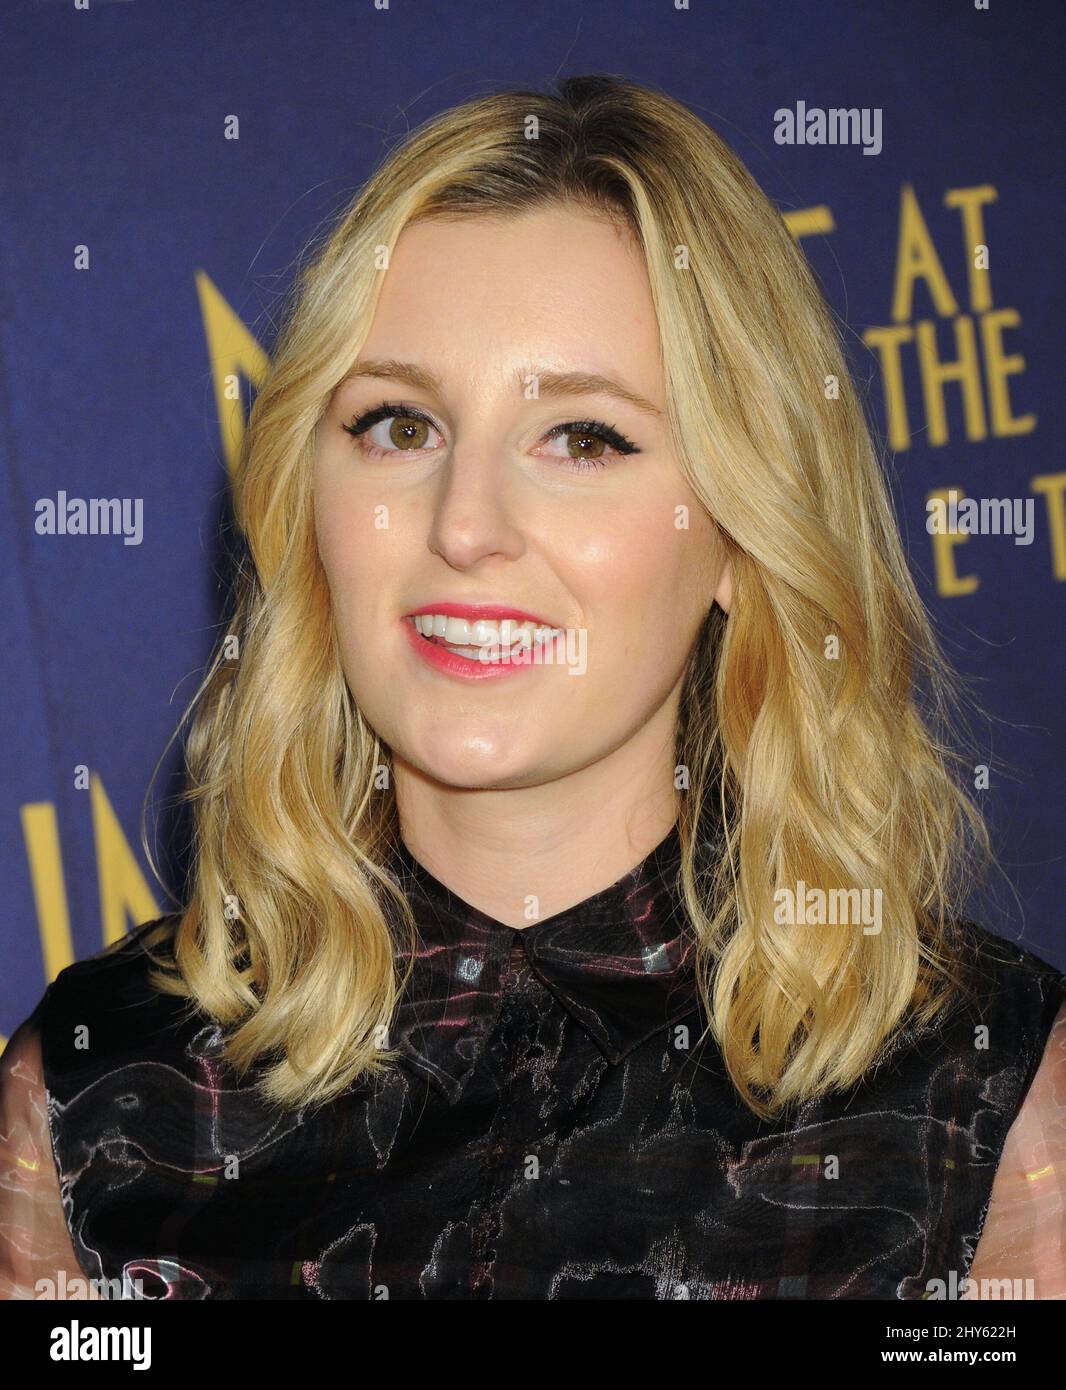 Laura Carmichael attending 'Night At The Museum: Secret of The Tomb' premiere held at the Ziegfeld Theatre in New York, USA. Stock Photo